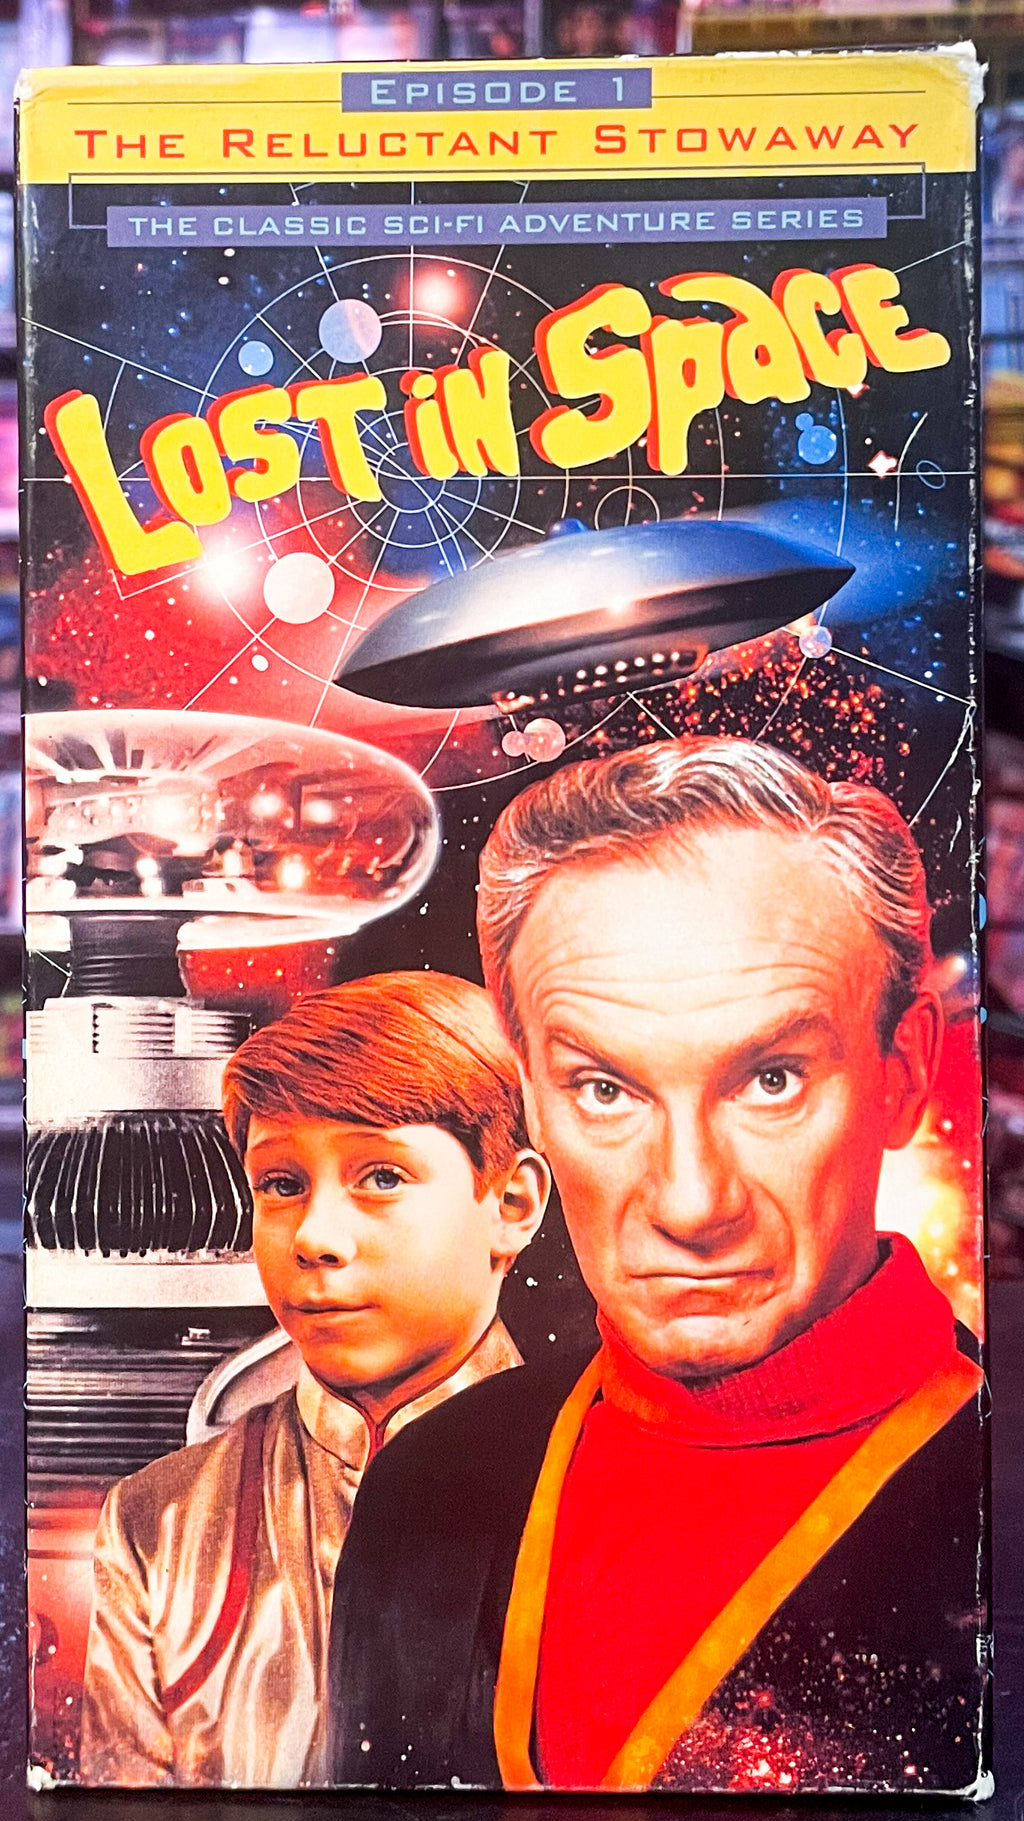 Lost In Space Ep: 1 - The Reluctant Stowaway